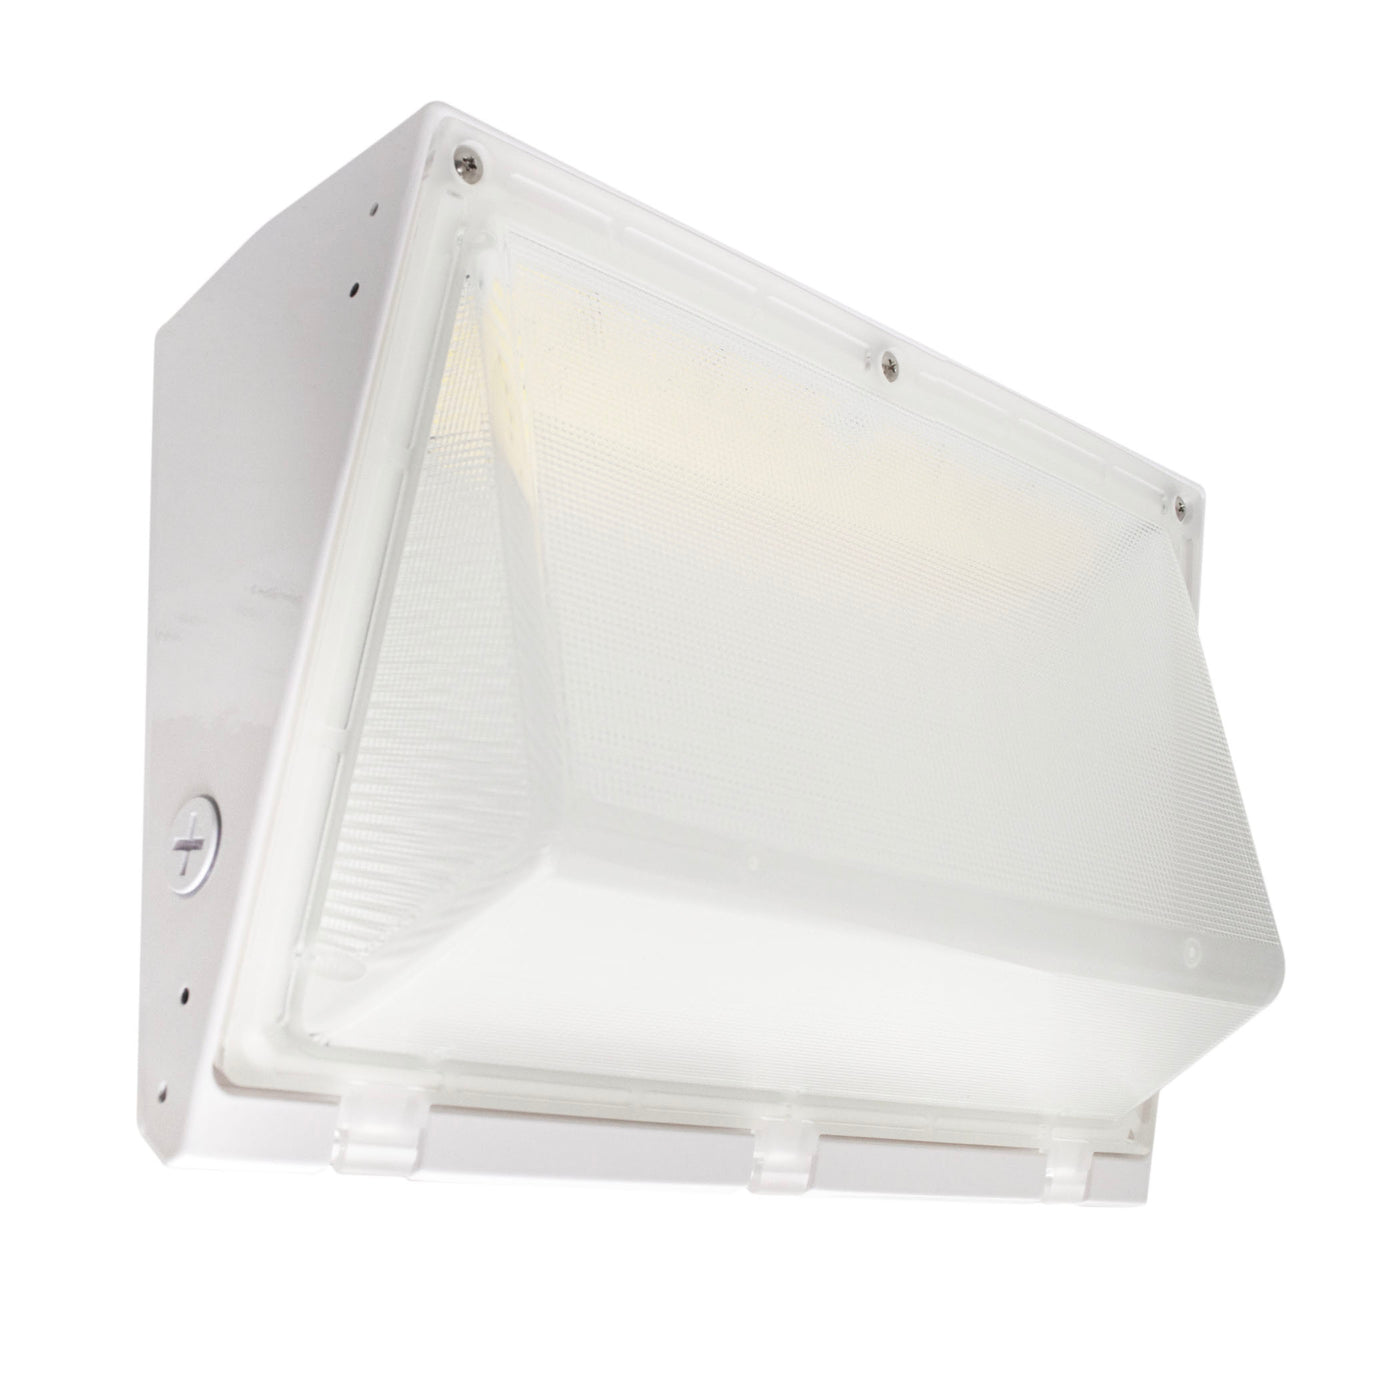 LED Wall Pack Light - 120W - 17,996 Lumens - Photocell Included - SWP4 - Forward Throw - White - DLC Listed